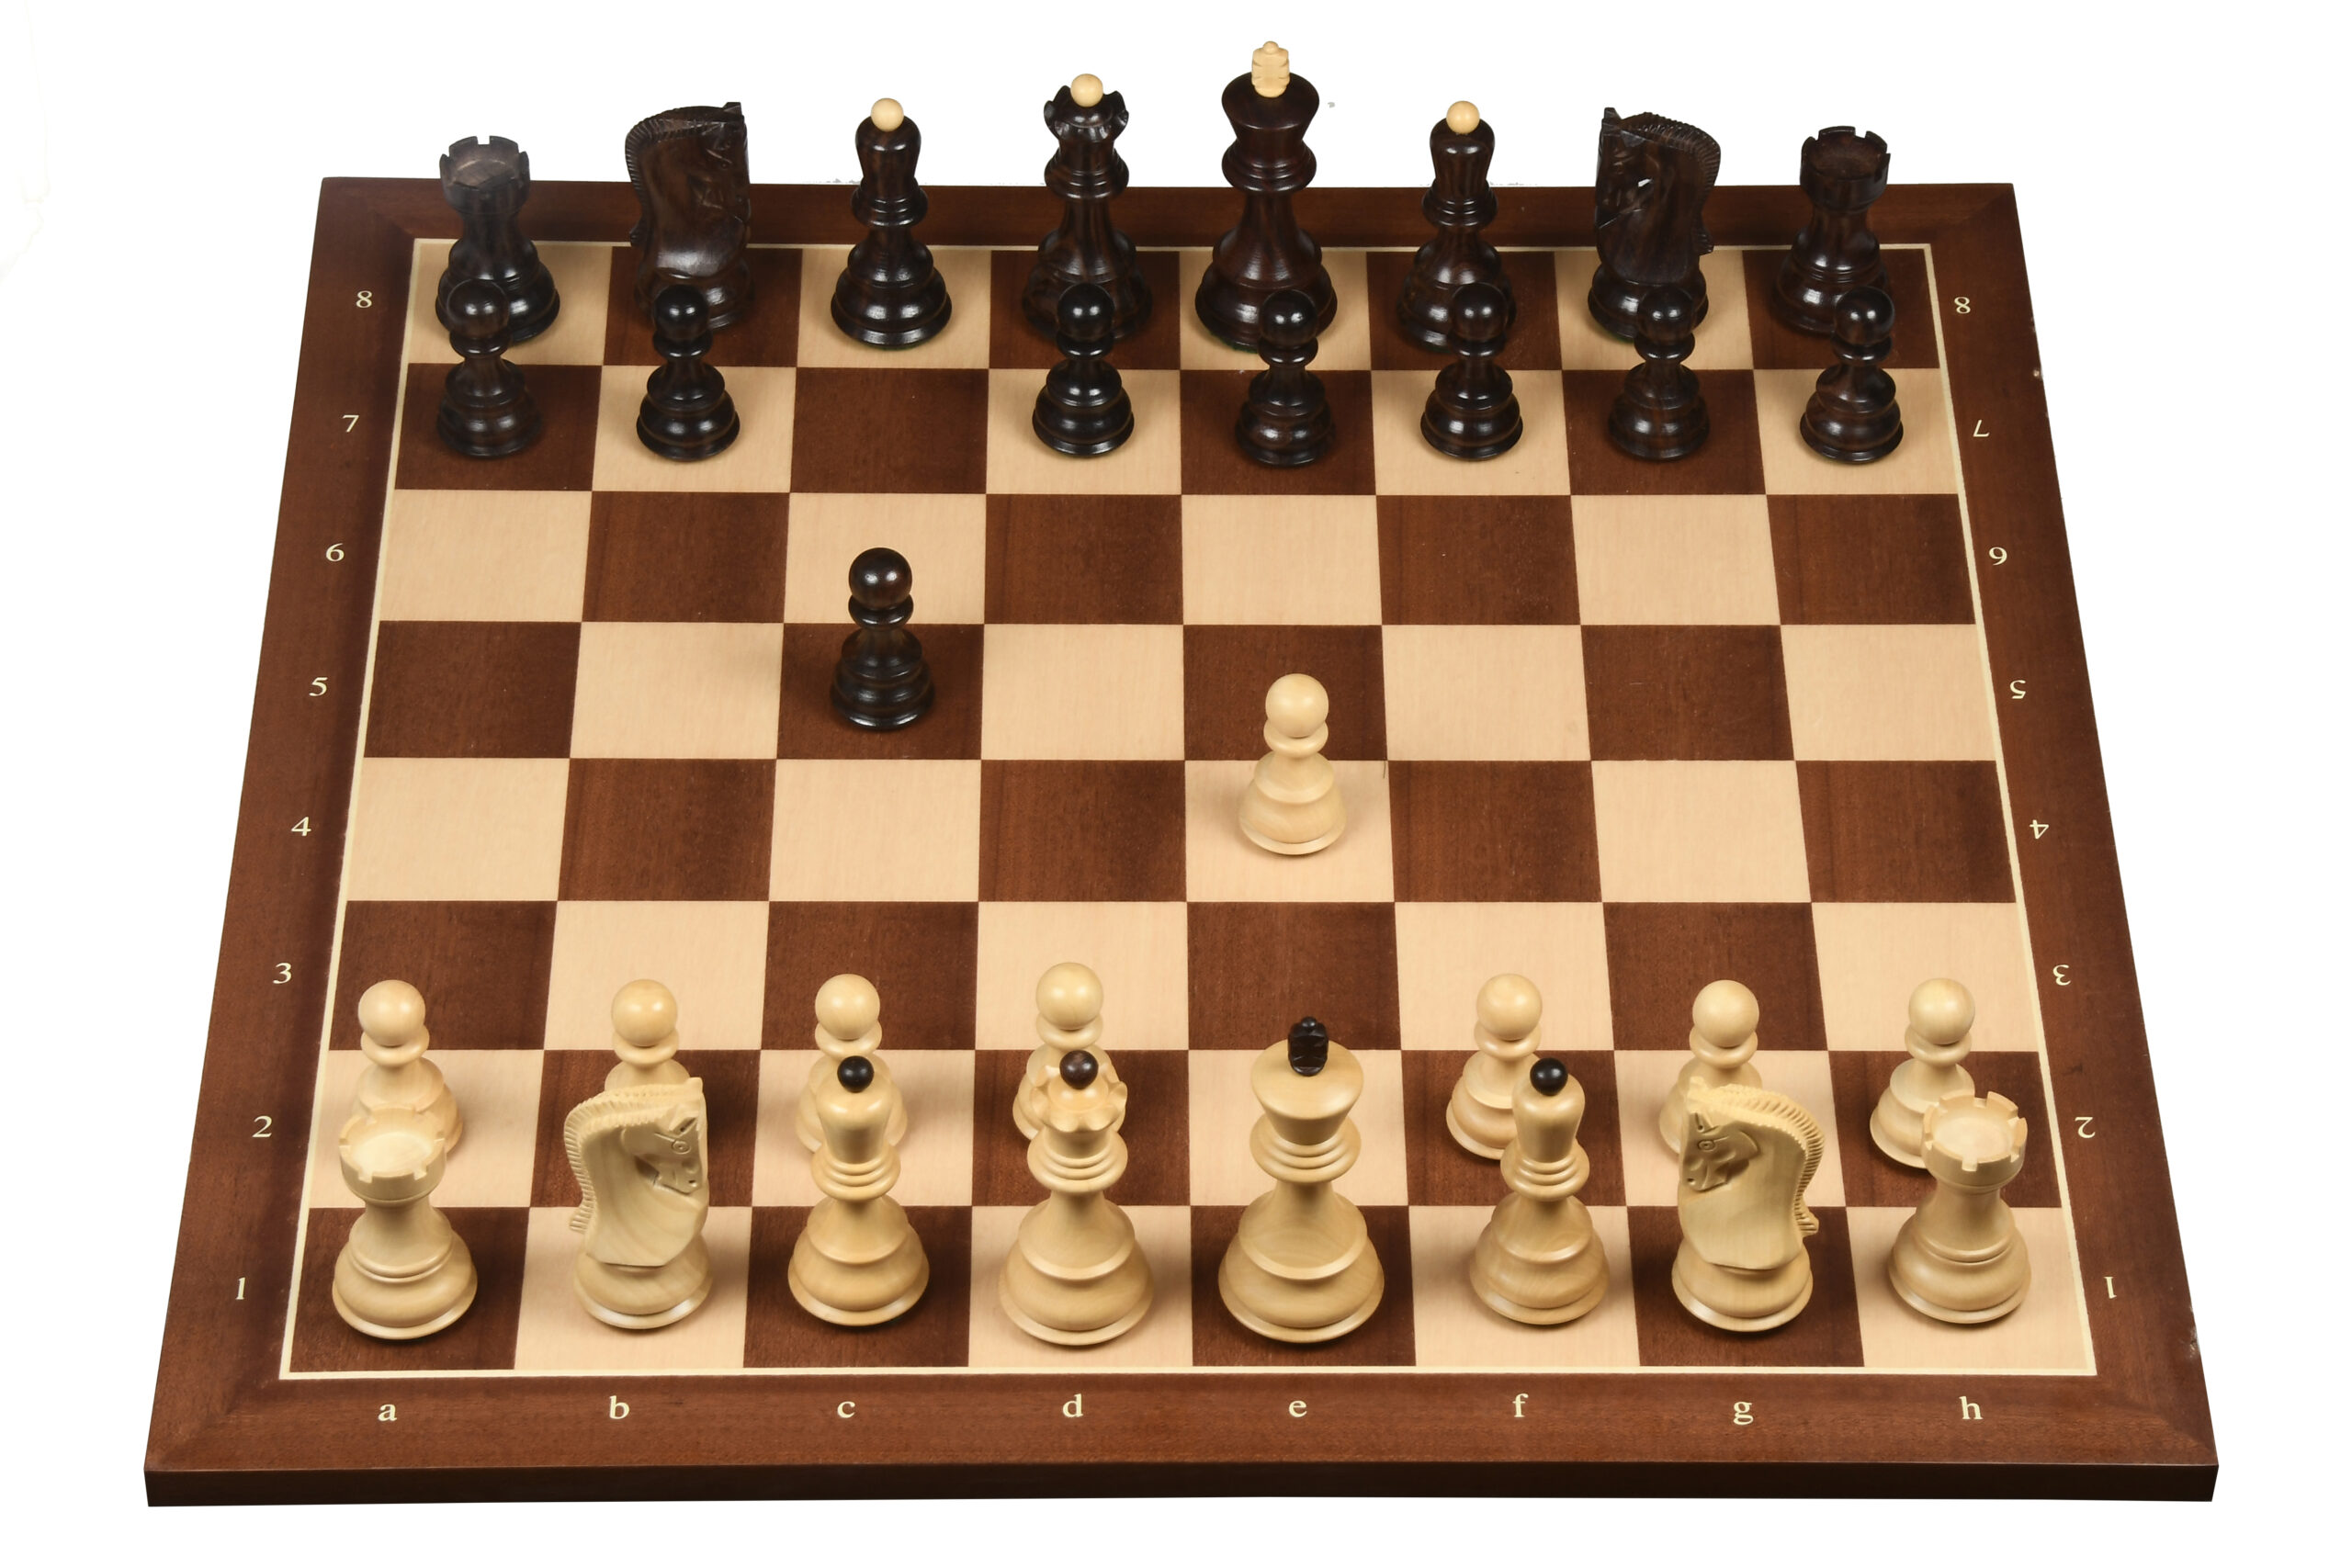 The Chessable Masters Sale begins! Up to 40% off 100+ opening